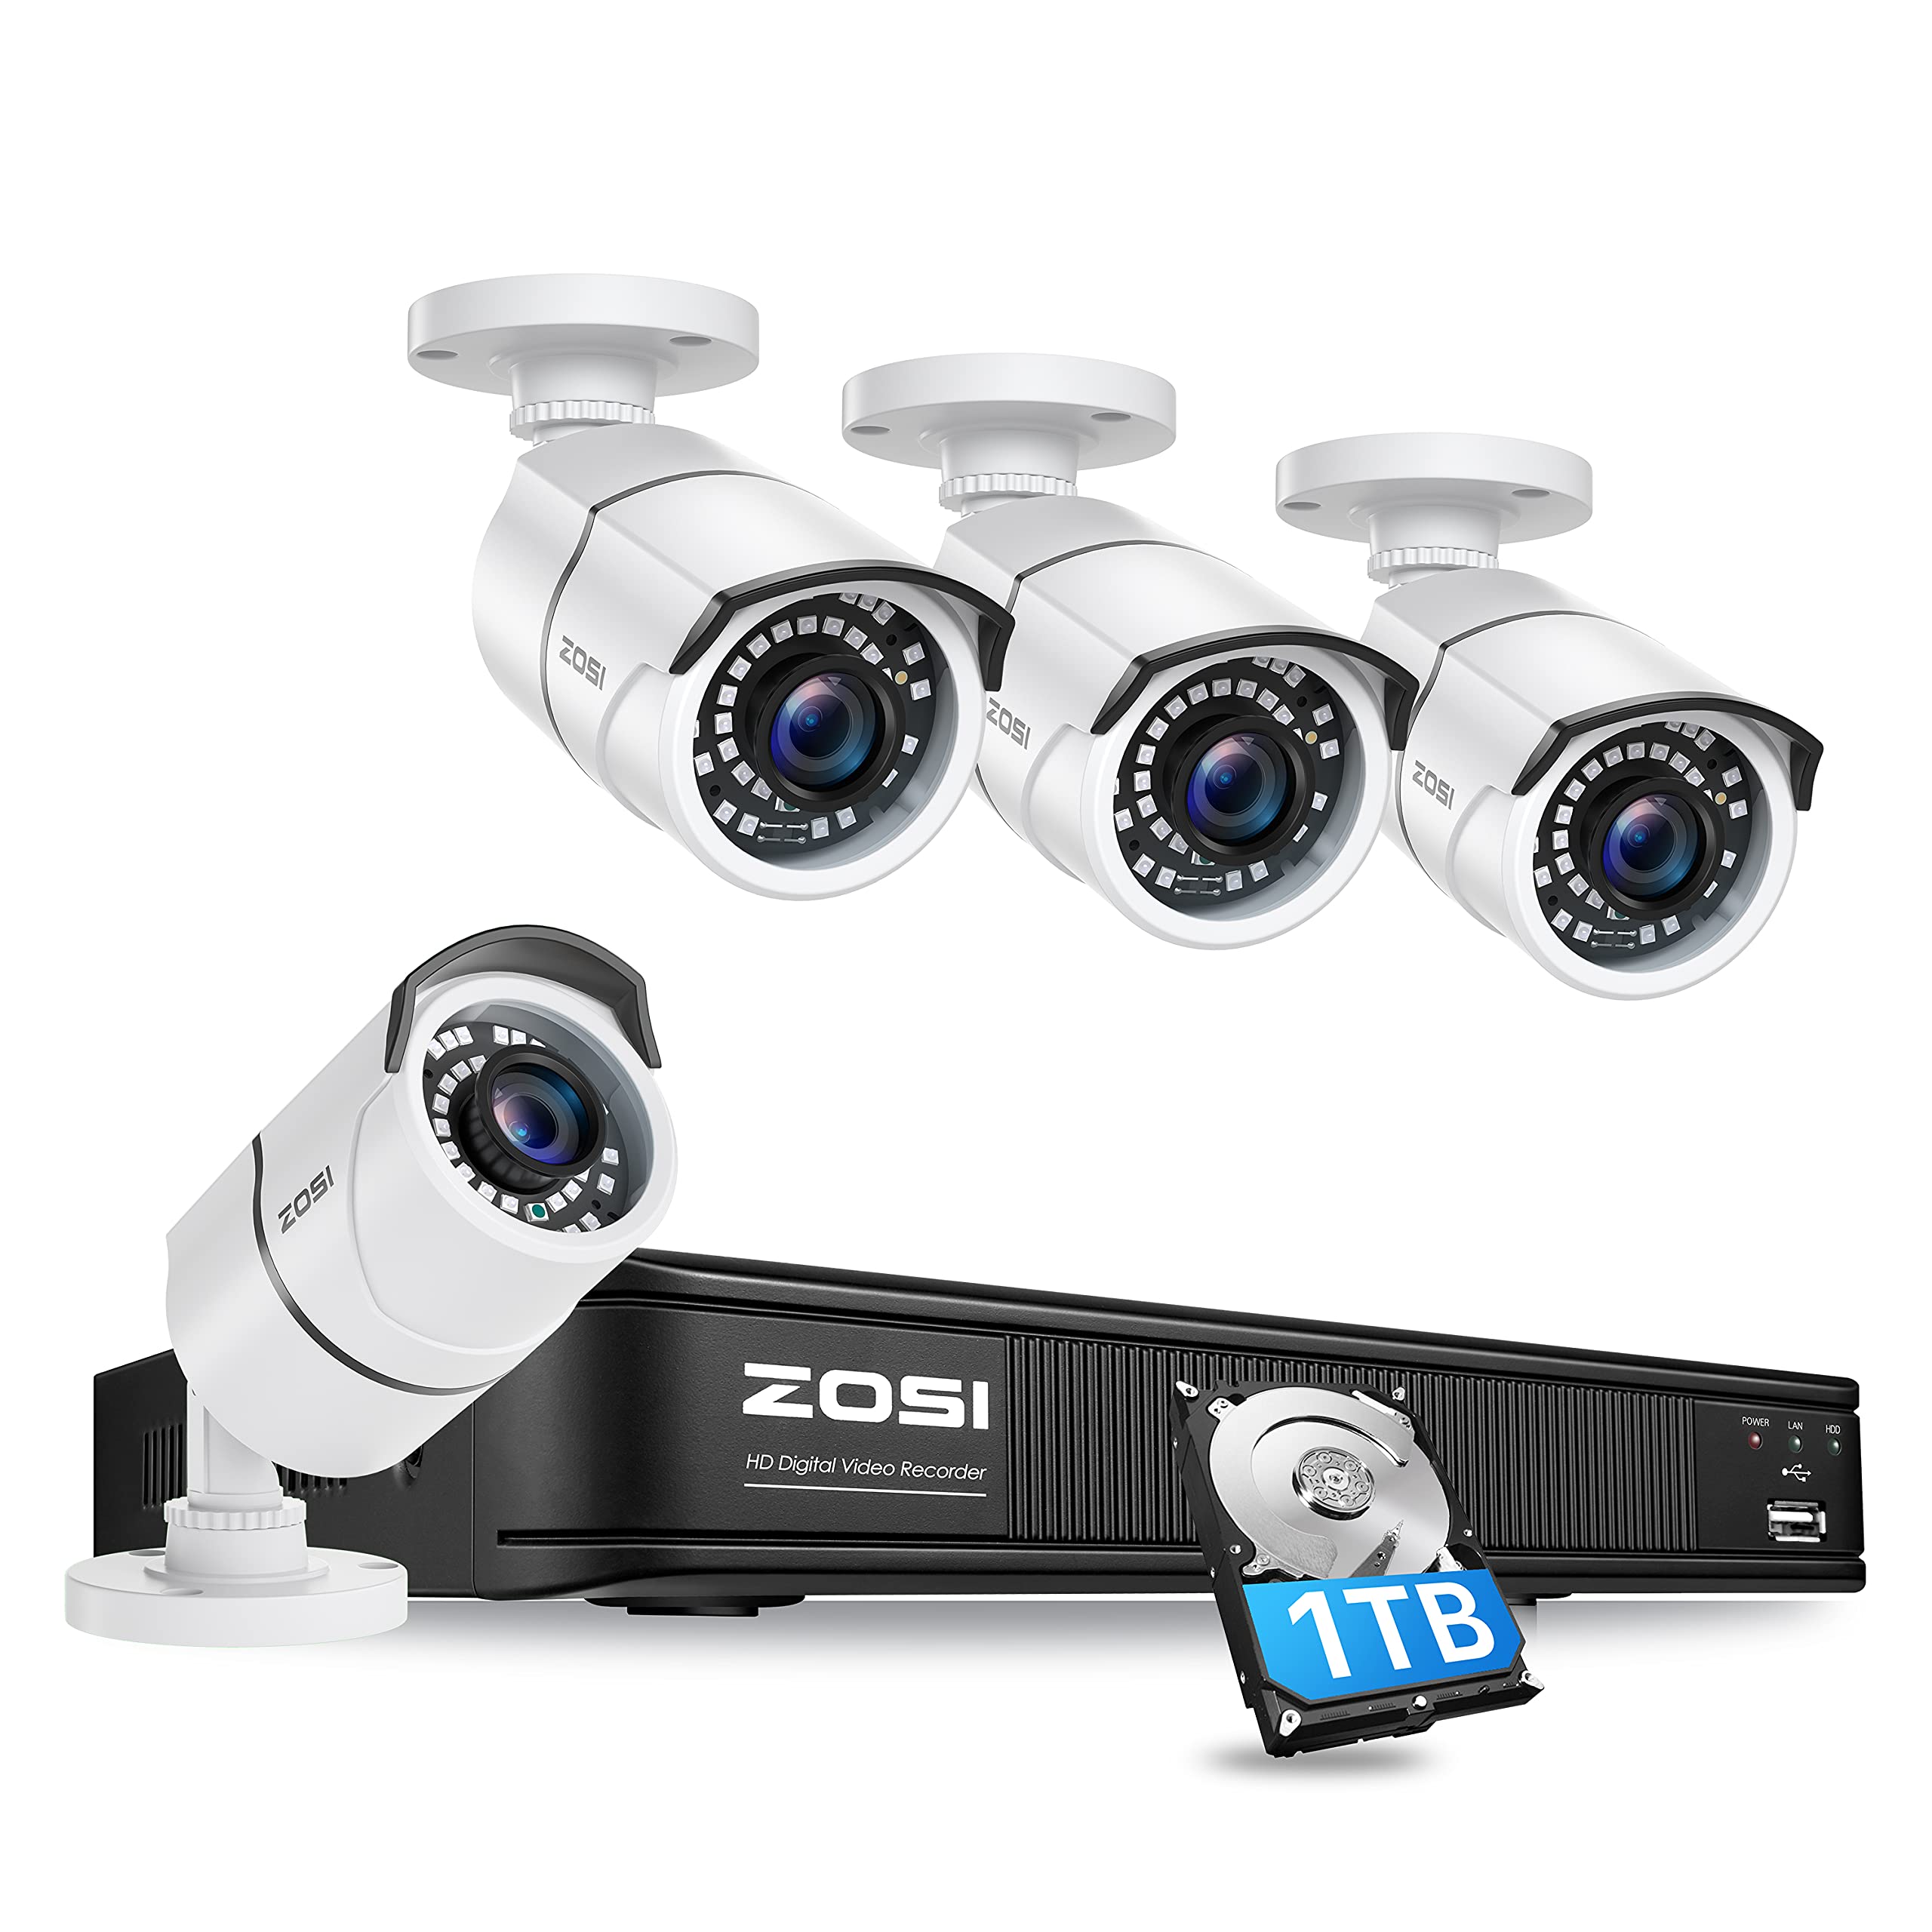 ZOSI Full 1080p H.265+ Security Camera Security System, 5MP Lite 8 Channle 4-in-1 CCTV DVR Recorder with 1TB Hard Drive and 4 x 1080p Surveillance Bullet Camera Outdoor Indoor with 120ft Night Vision